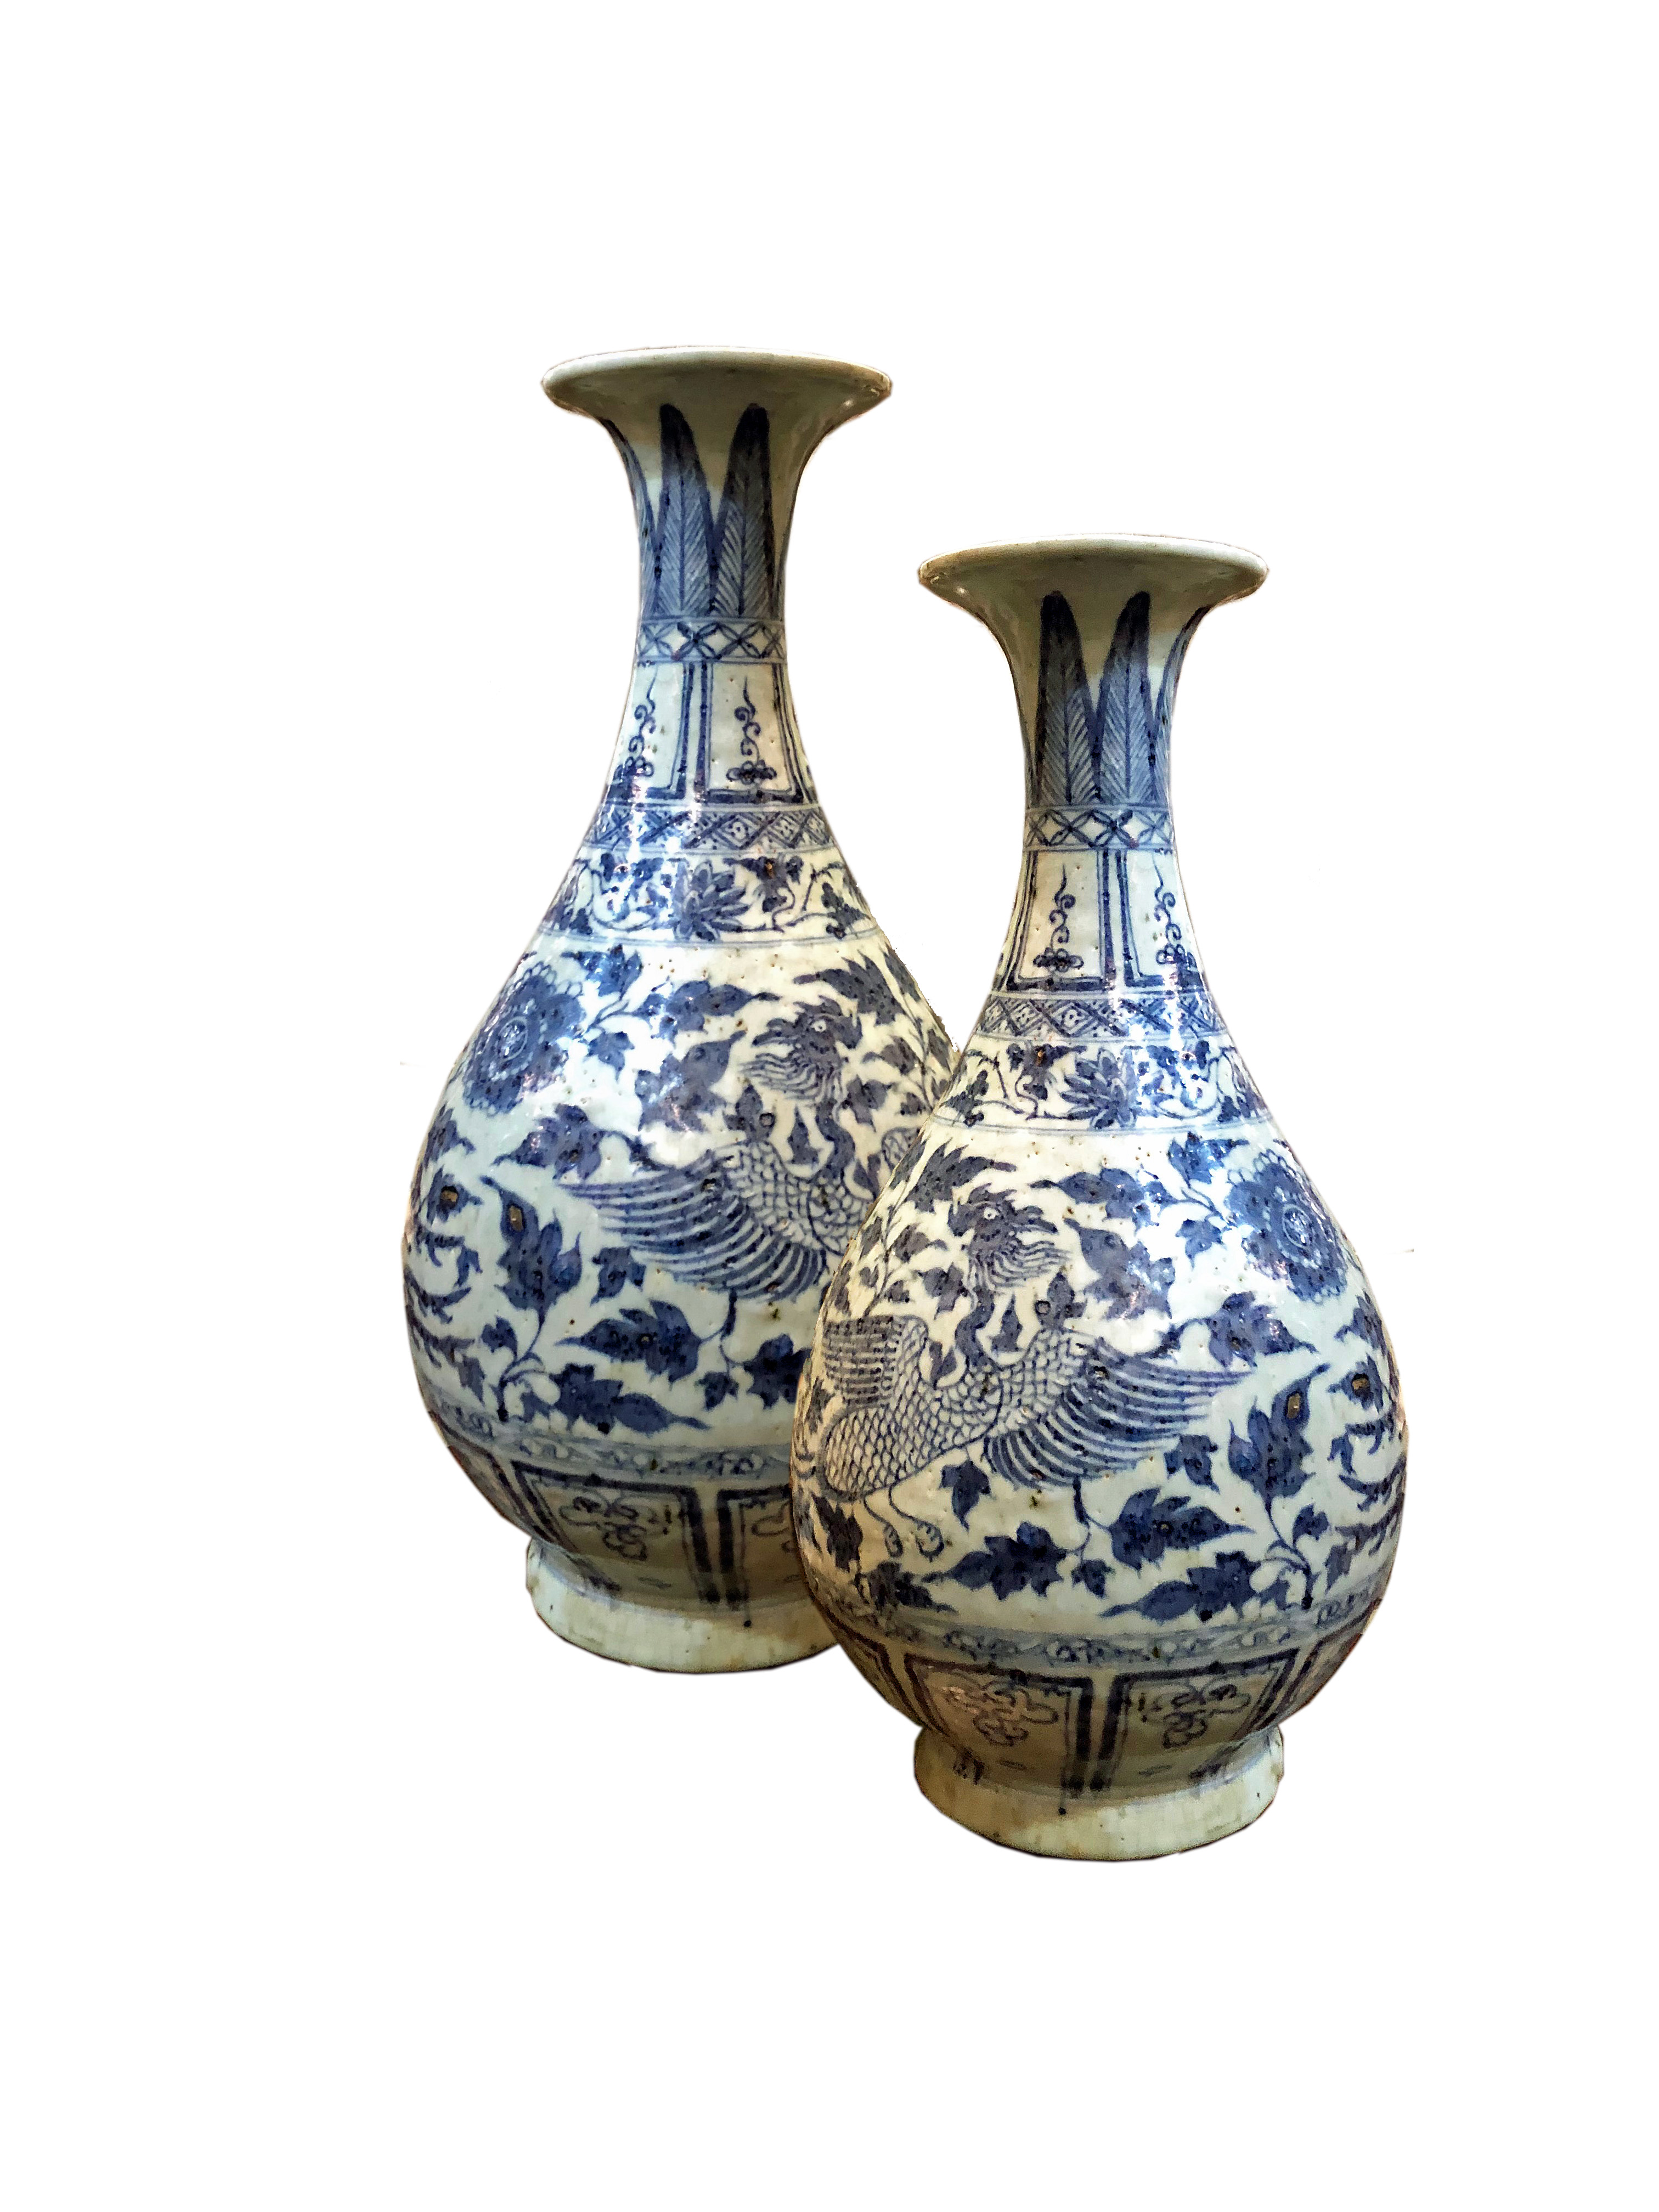 A Pair of Chinese Export Blue and White Porcelain Vases No. 4787